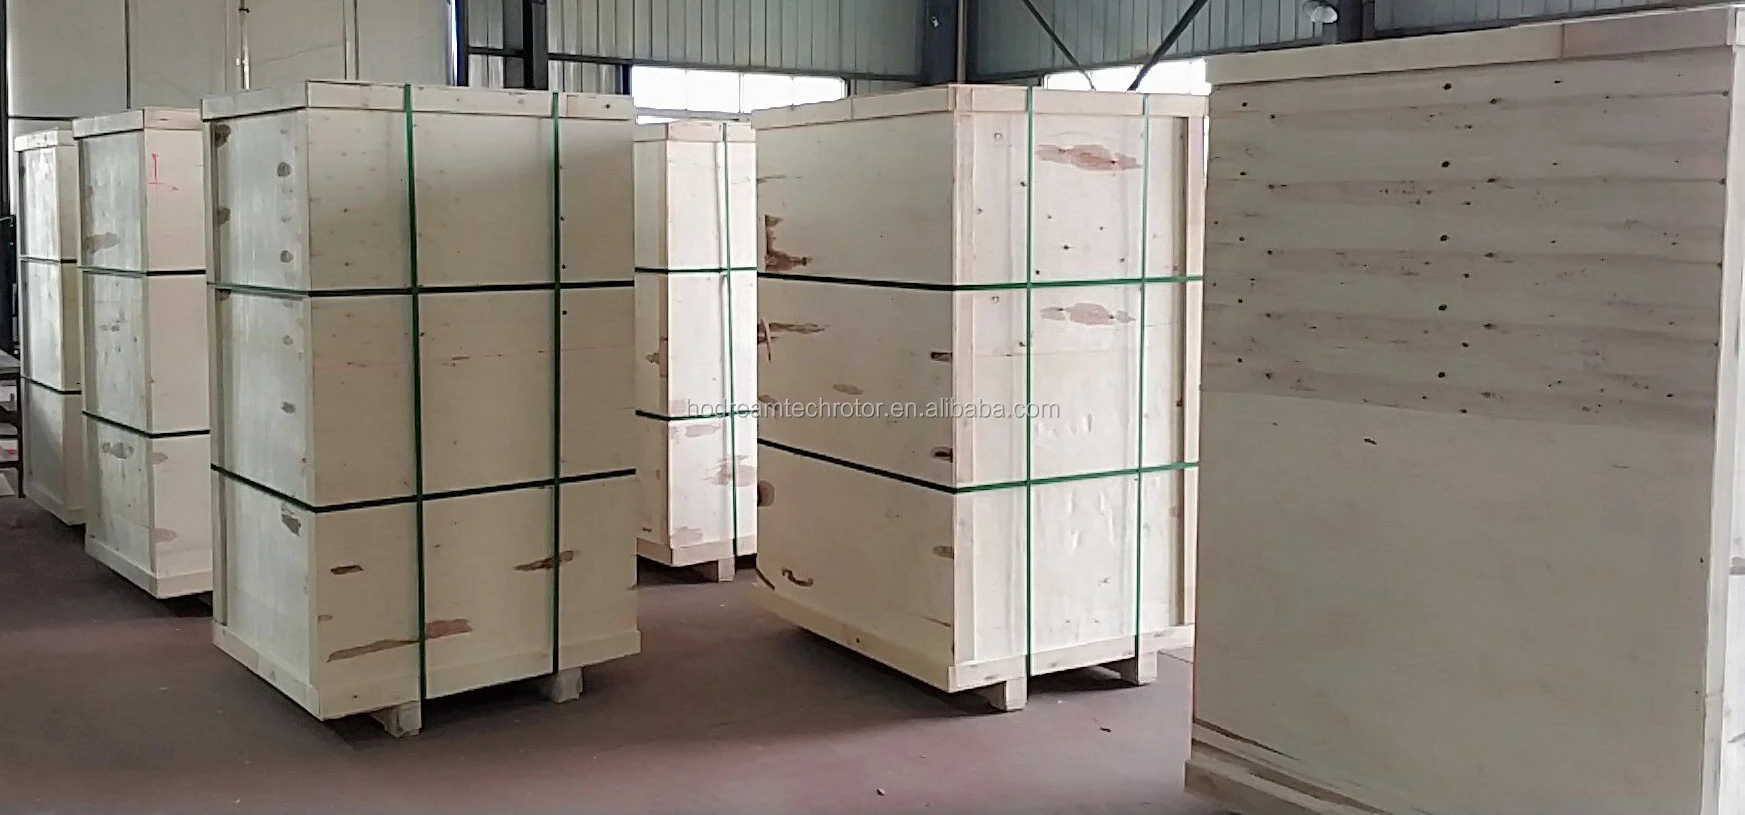 counterflow hydrophilic aluminum plate air to air heat recovery exchanger core